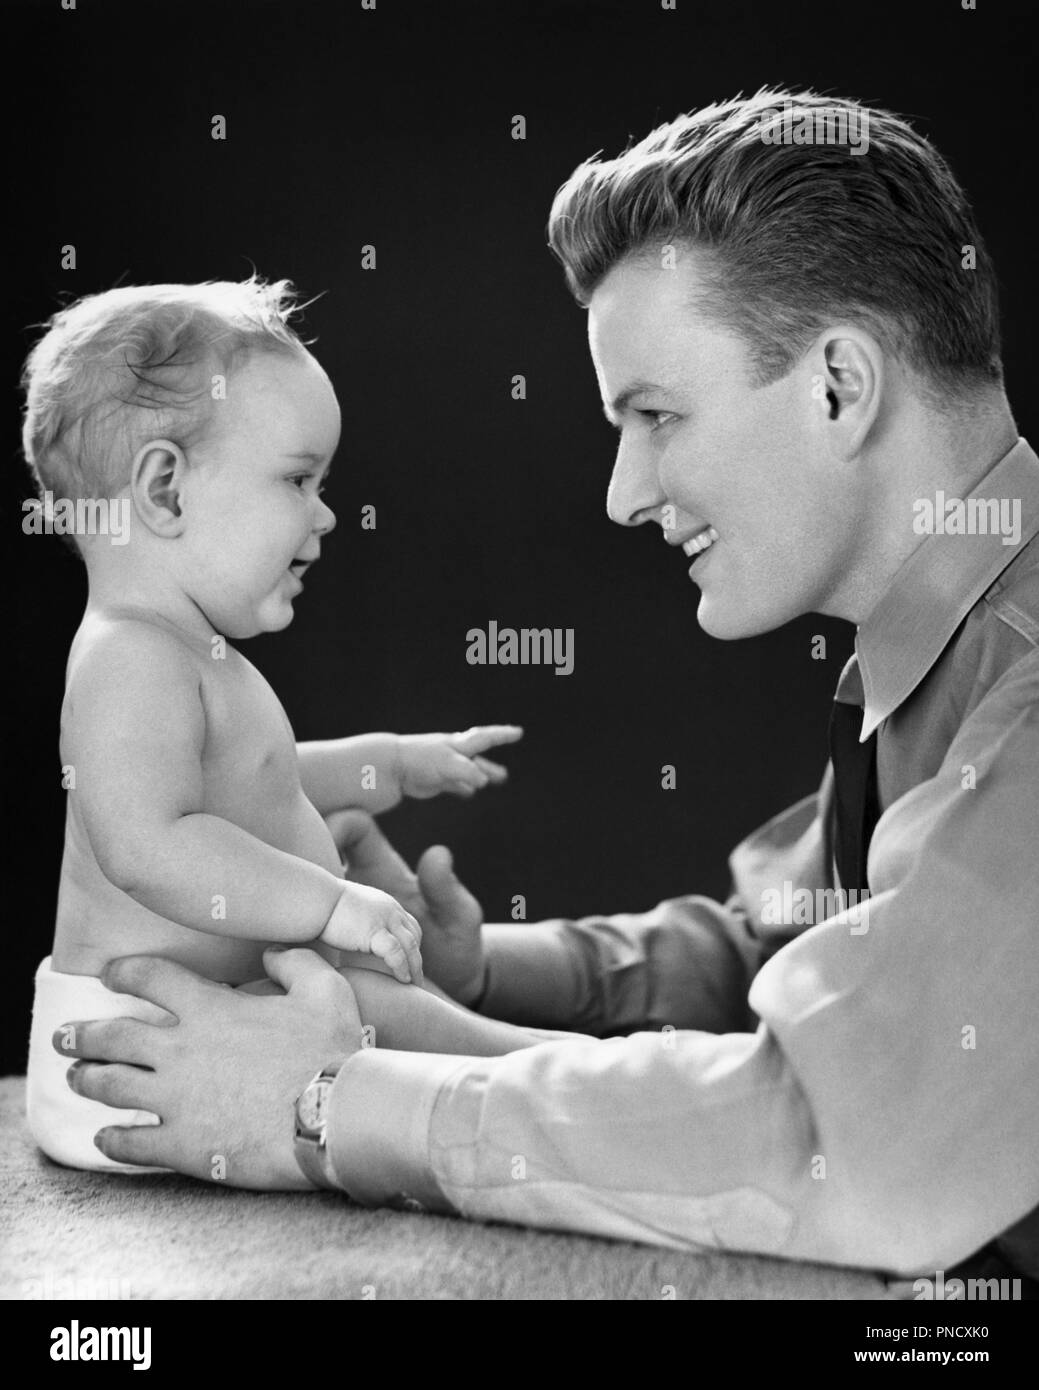 1940s SMILING YOUNG MAN FACE TO FACE EYE TO EYE LOOKING AT YEAR OLD BABY GIRL DAUGHTER SITTING UP  - b1168 HAR001 HARS LIFESTYLE CELEBRATION FEMALES HOME LIFE HALF-LENGTH DAUGHTERS PERSONS INSPIRATION CARING SPIRITUALITY CONFIDENCE FATHERS B&W HAPPINESS HEAD AND SHOULDERS CHEERFUL STRENGTH DADS EXCITEMENT POWERFUL PRIDE AT SMILES FACE TO FACE CONNECTION EYE TO EYE JOYFUL STYLISH GROWTH JUVENILES ONE YEAR OLD TOGETHERNESS YOUNG ADULT MAN BABY GIRL BLACK AND WHITE CAUCASIAN ETHNICITY HAR001 OLD FASHIONED SITTING UP Stock Photo